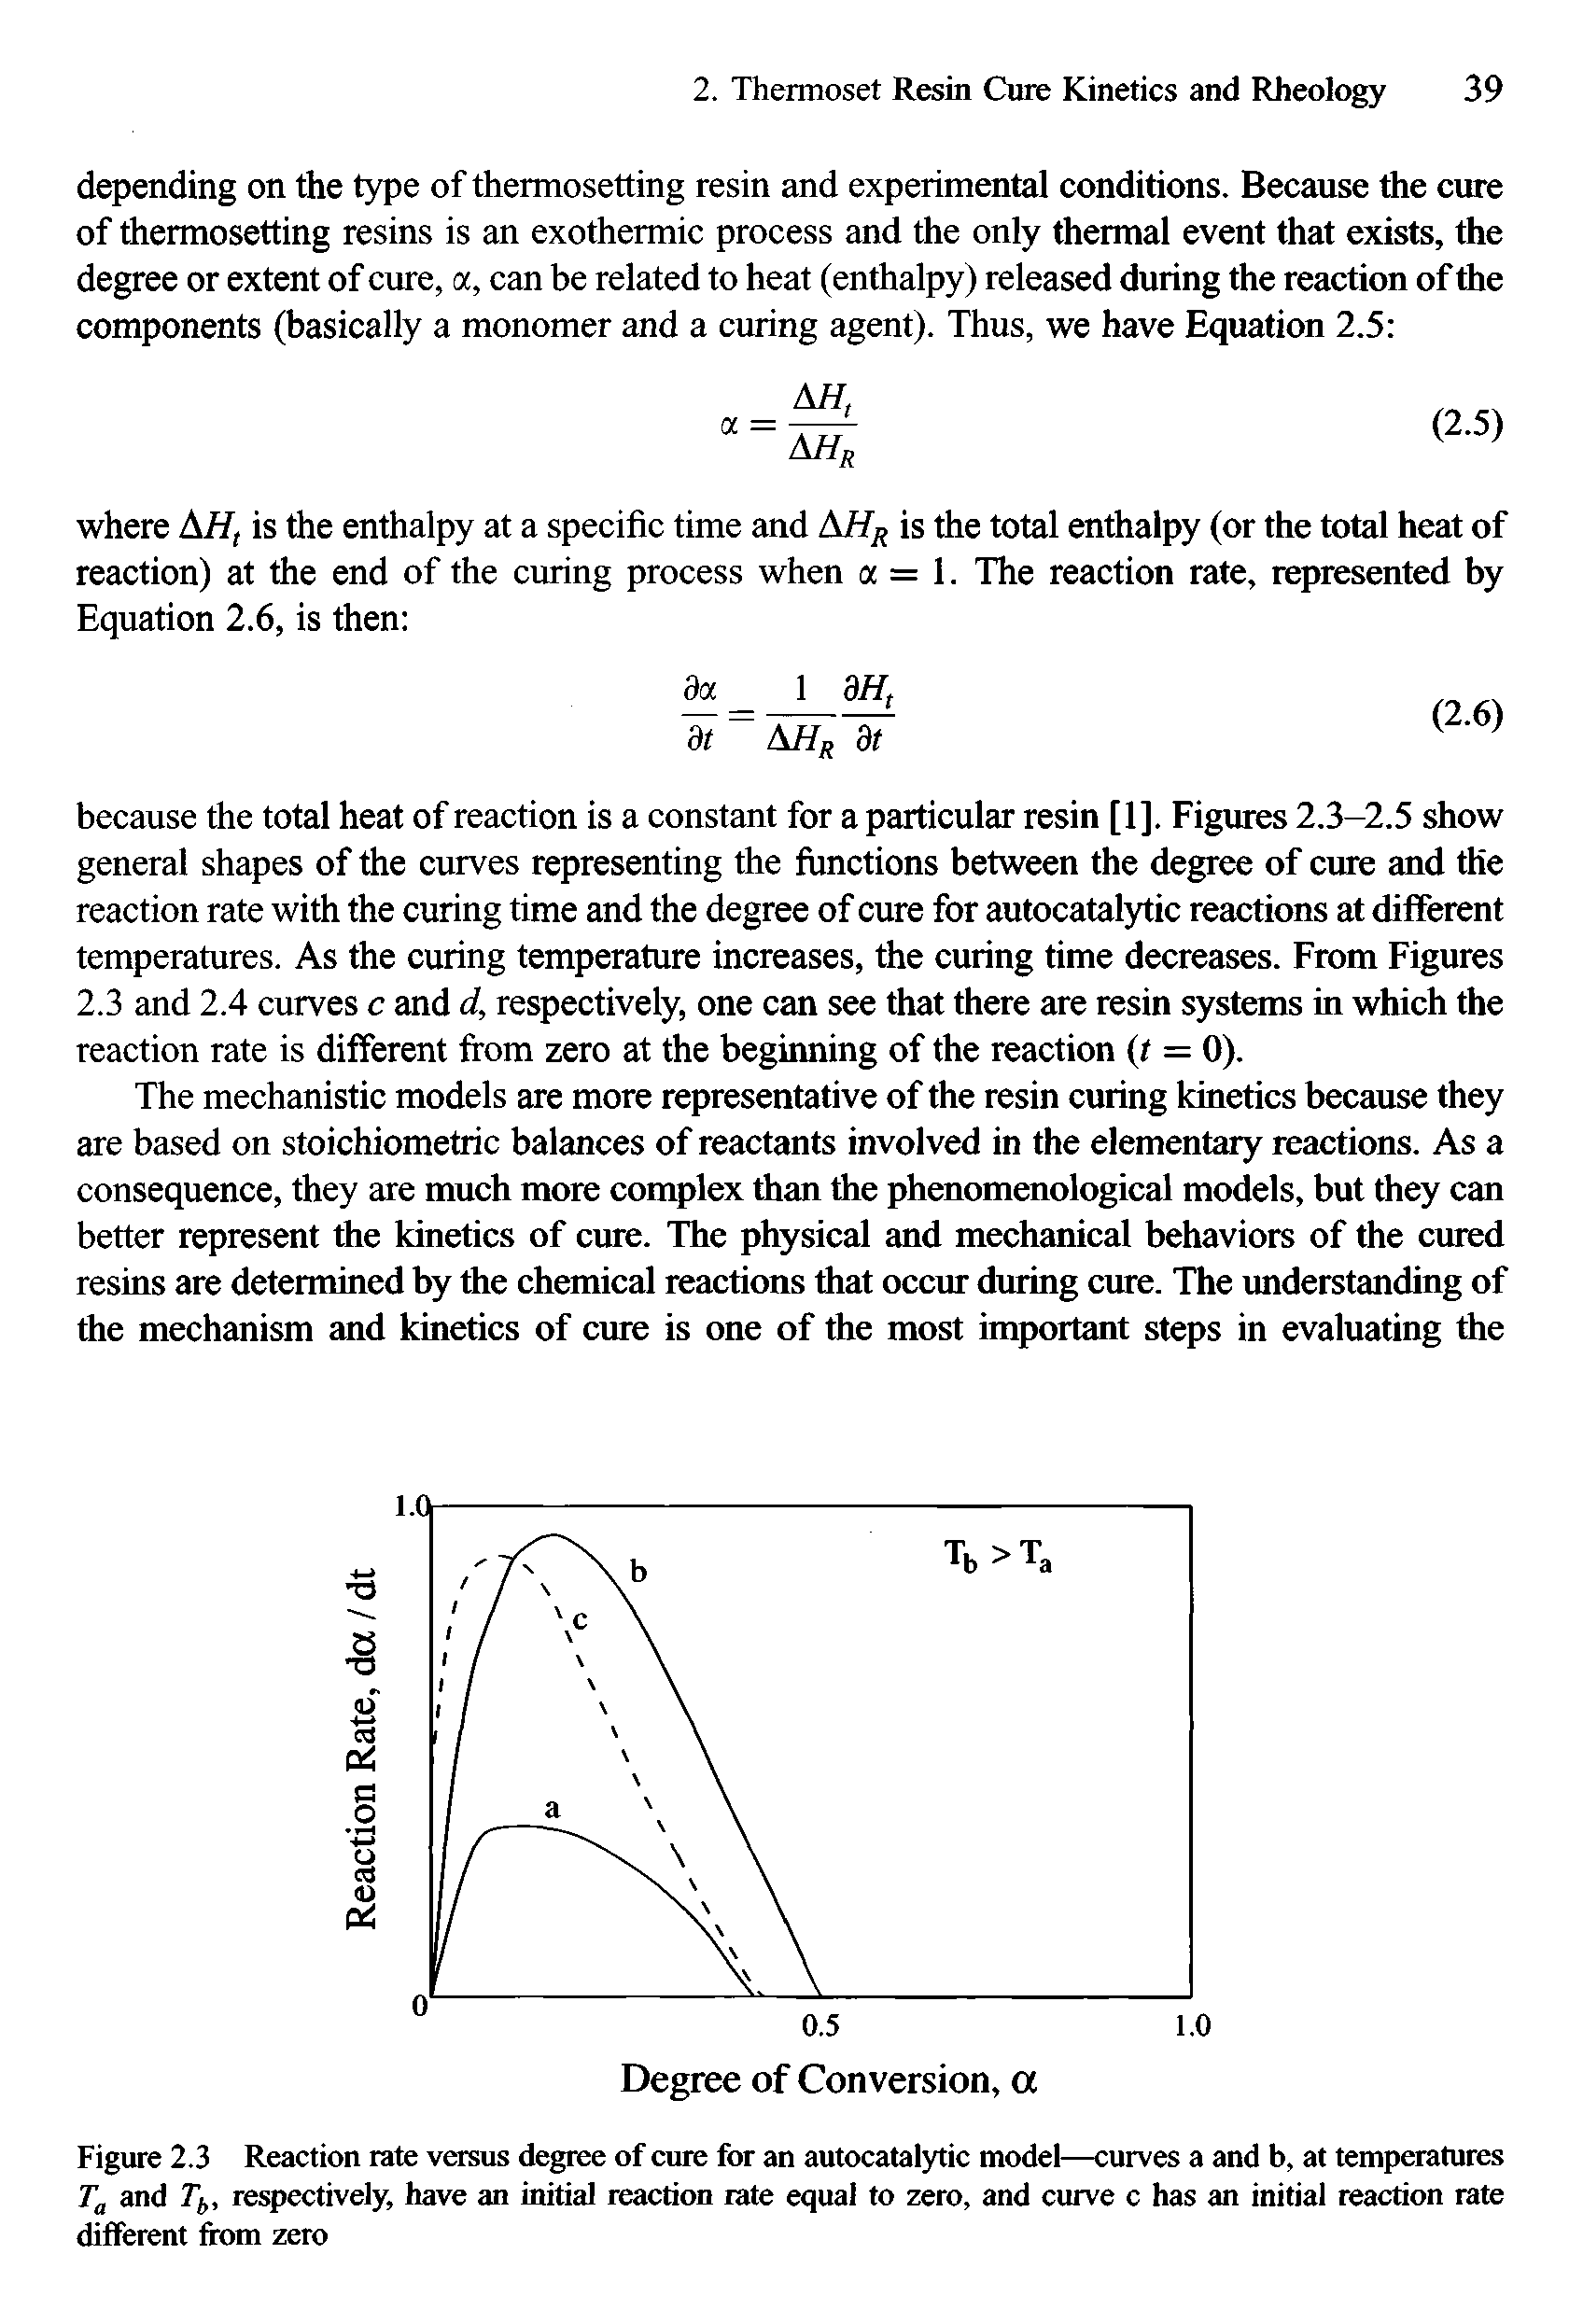 Figure 2.3 Reaction rate versus degree of cure for an autocatalytic model—curves a and b, at temperatures Ta and Tb, respectively, have an initial reaction rate equal to zero, and curve c has an initial reaction rate different from zero...